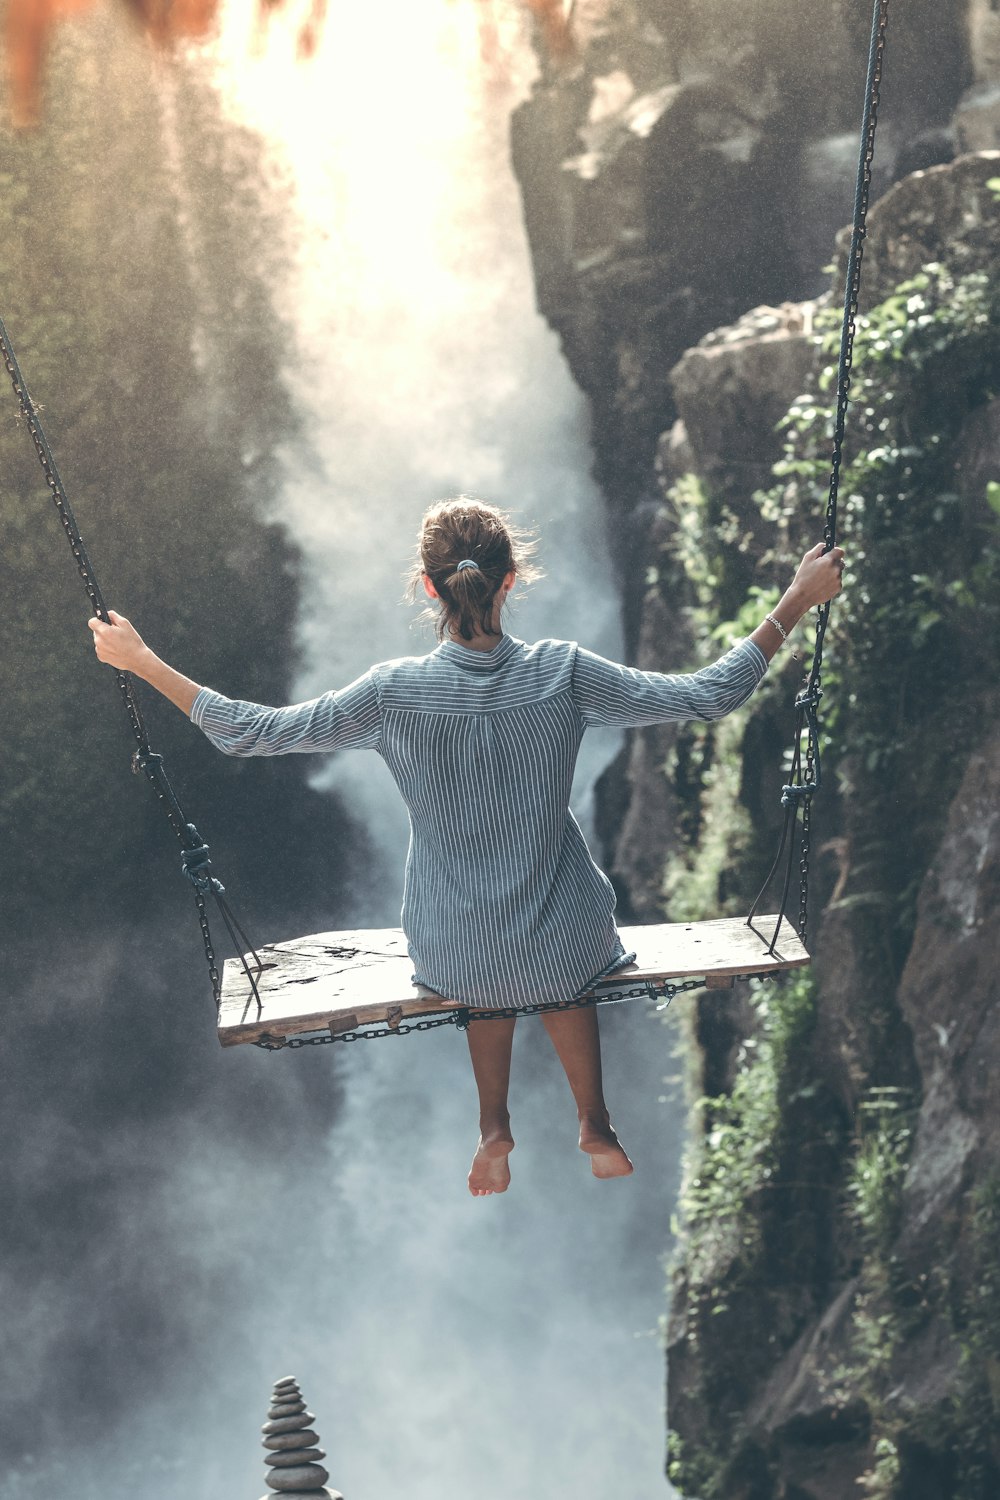 100 Swing Pictures Download Free Images On Unsplash